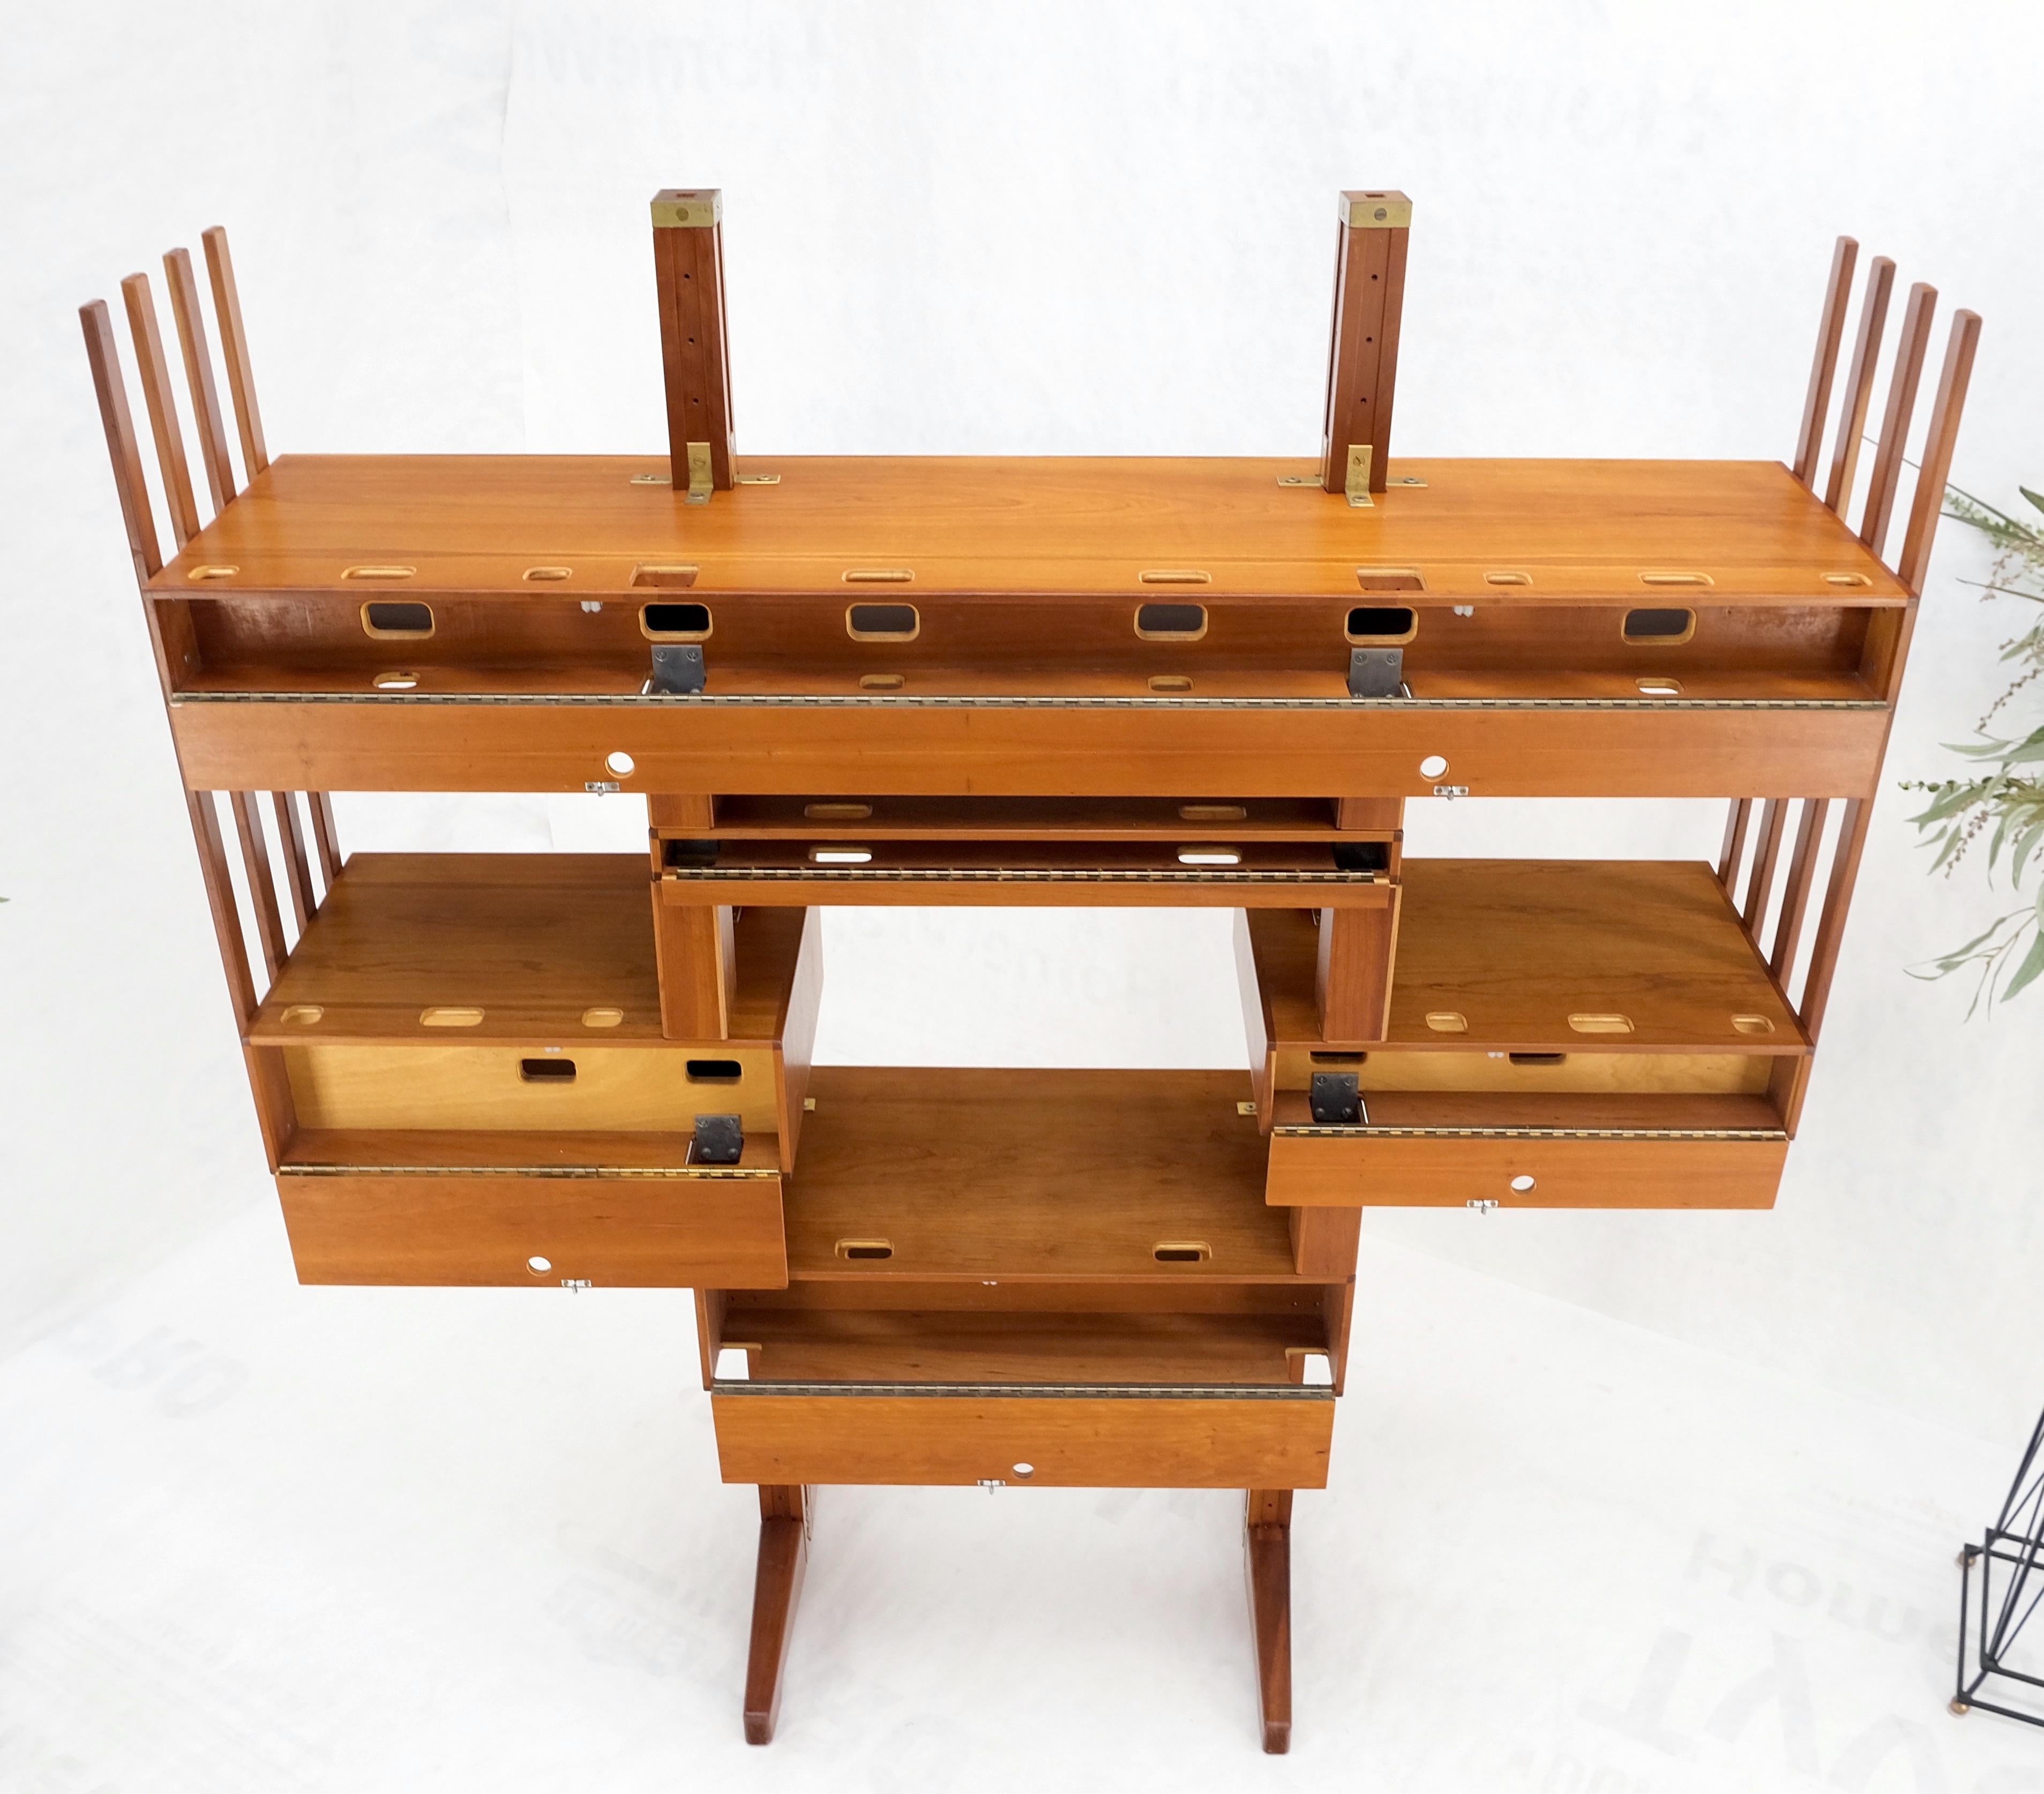 Custom Stereo Equipment Etagere Shelf W/ Sophisticated Concealed Chaise Way Mint For Sale 8